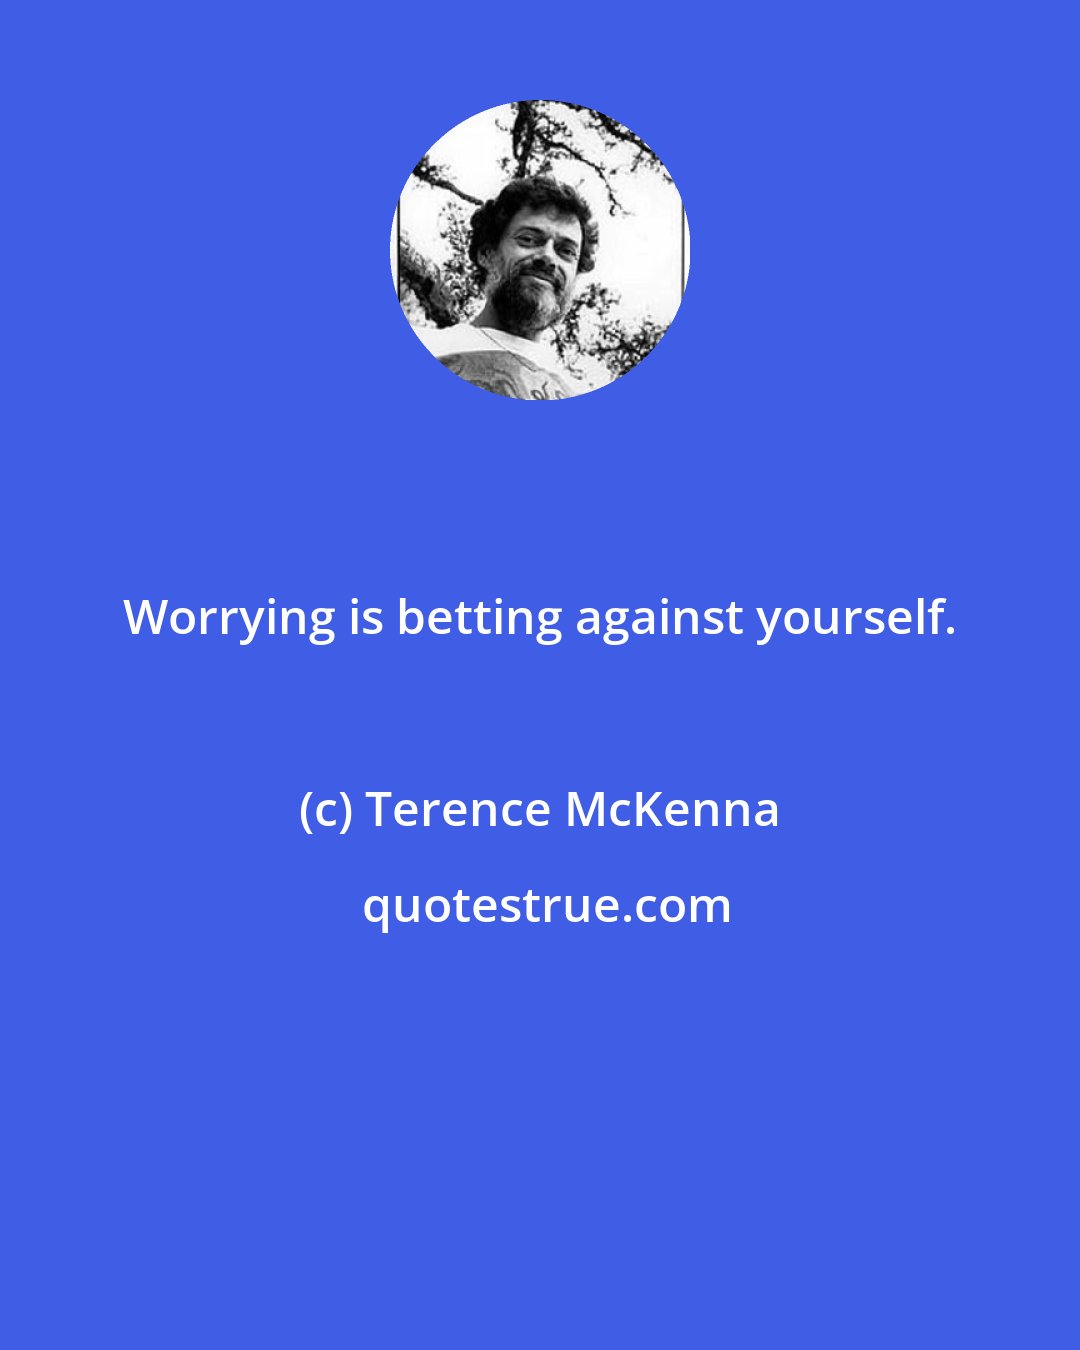 Terence McKenna: Worrying is betting against yourself.